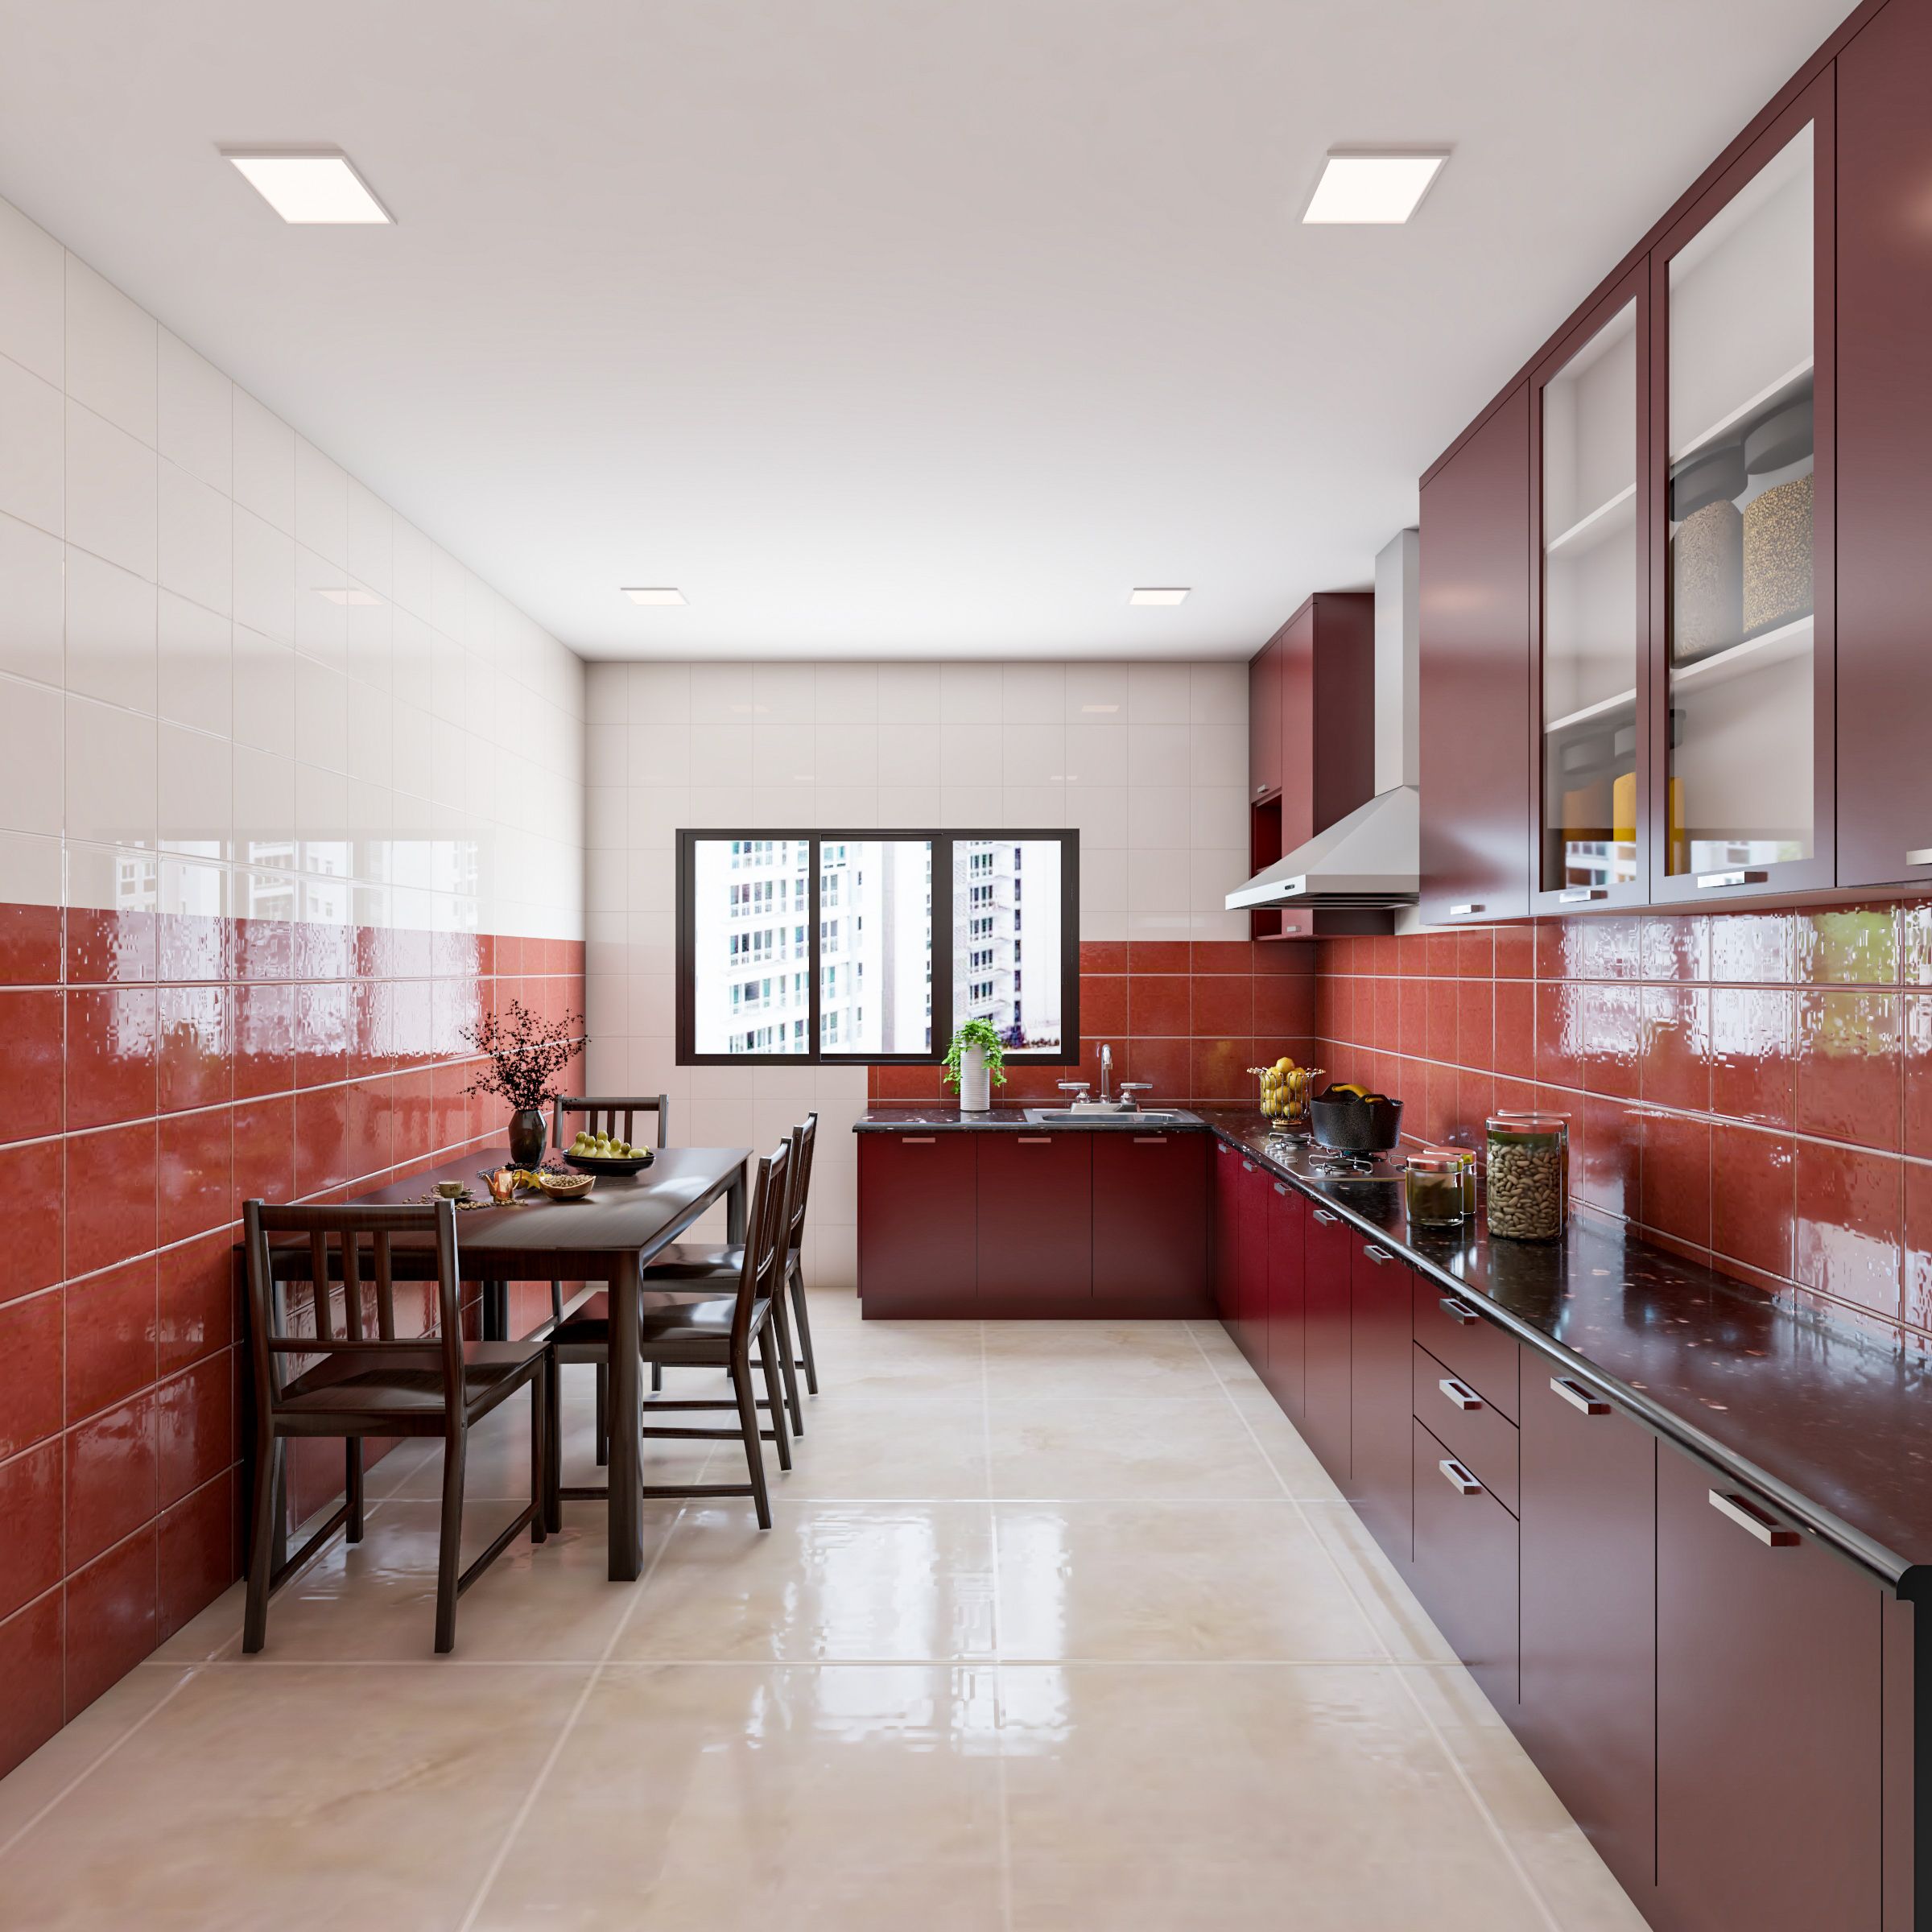 Modern Glossy Red Kitchen Renovation Design With Cabinets